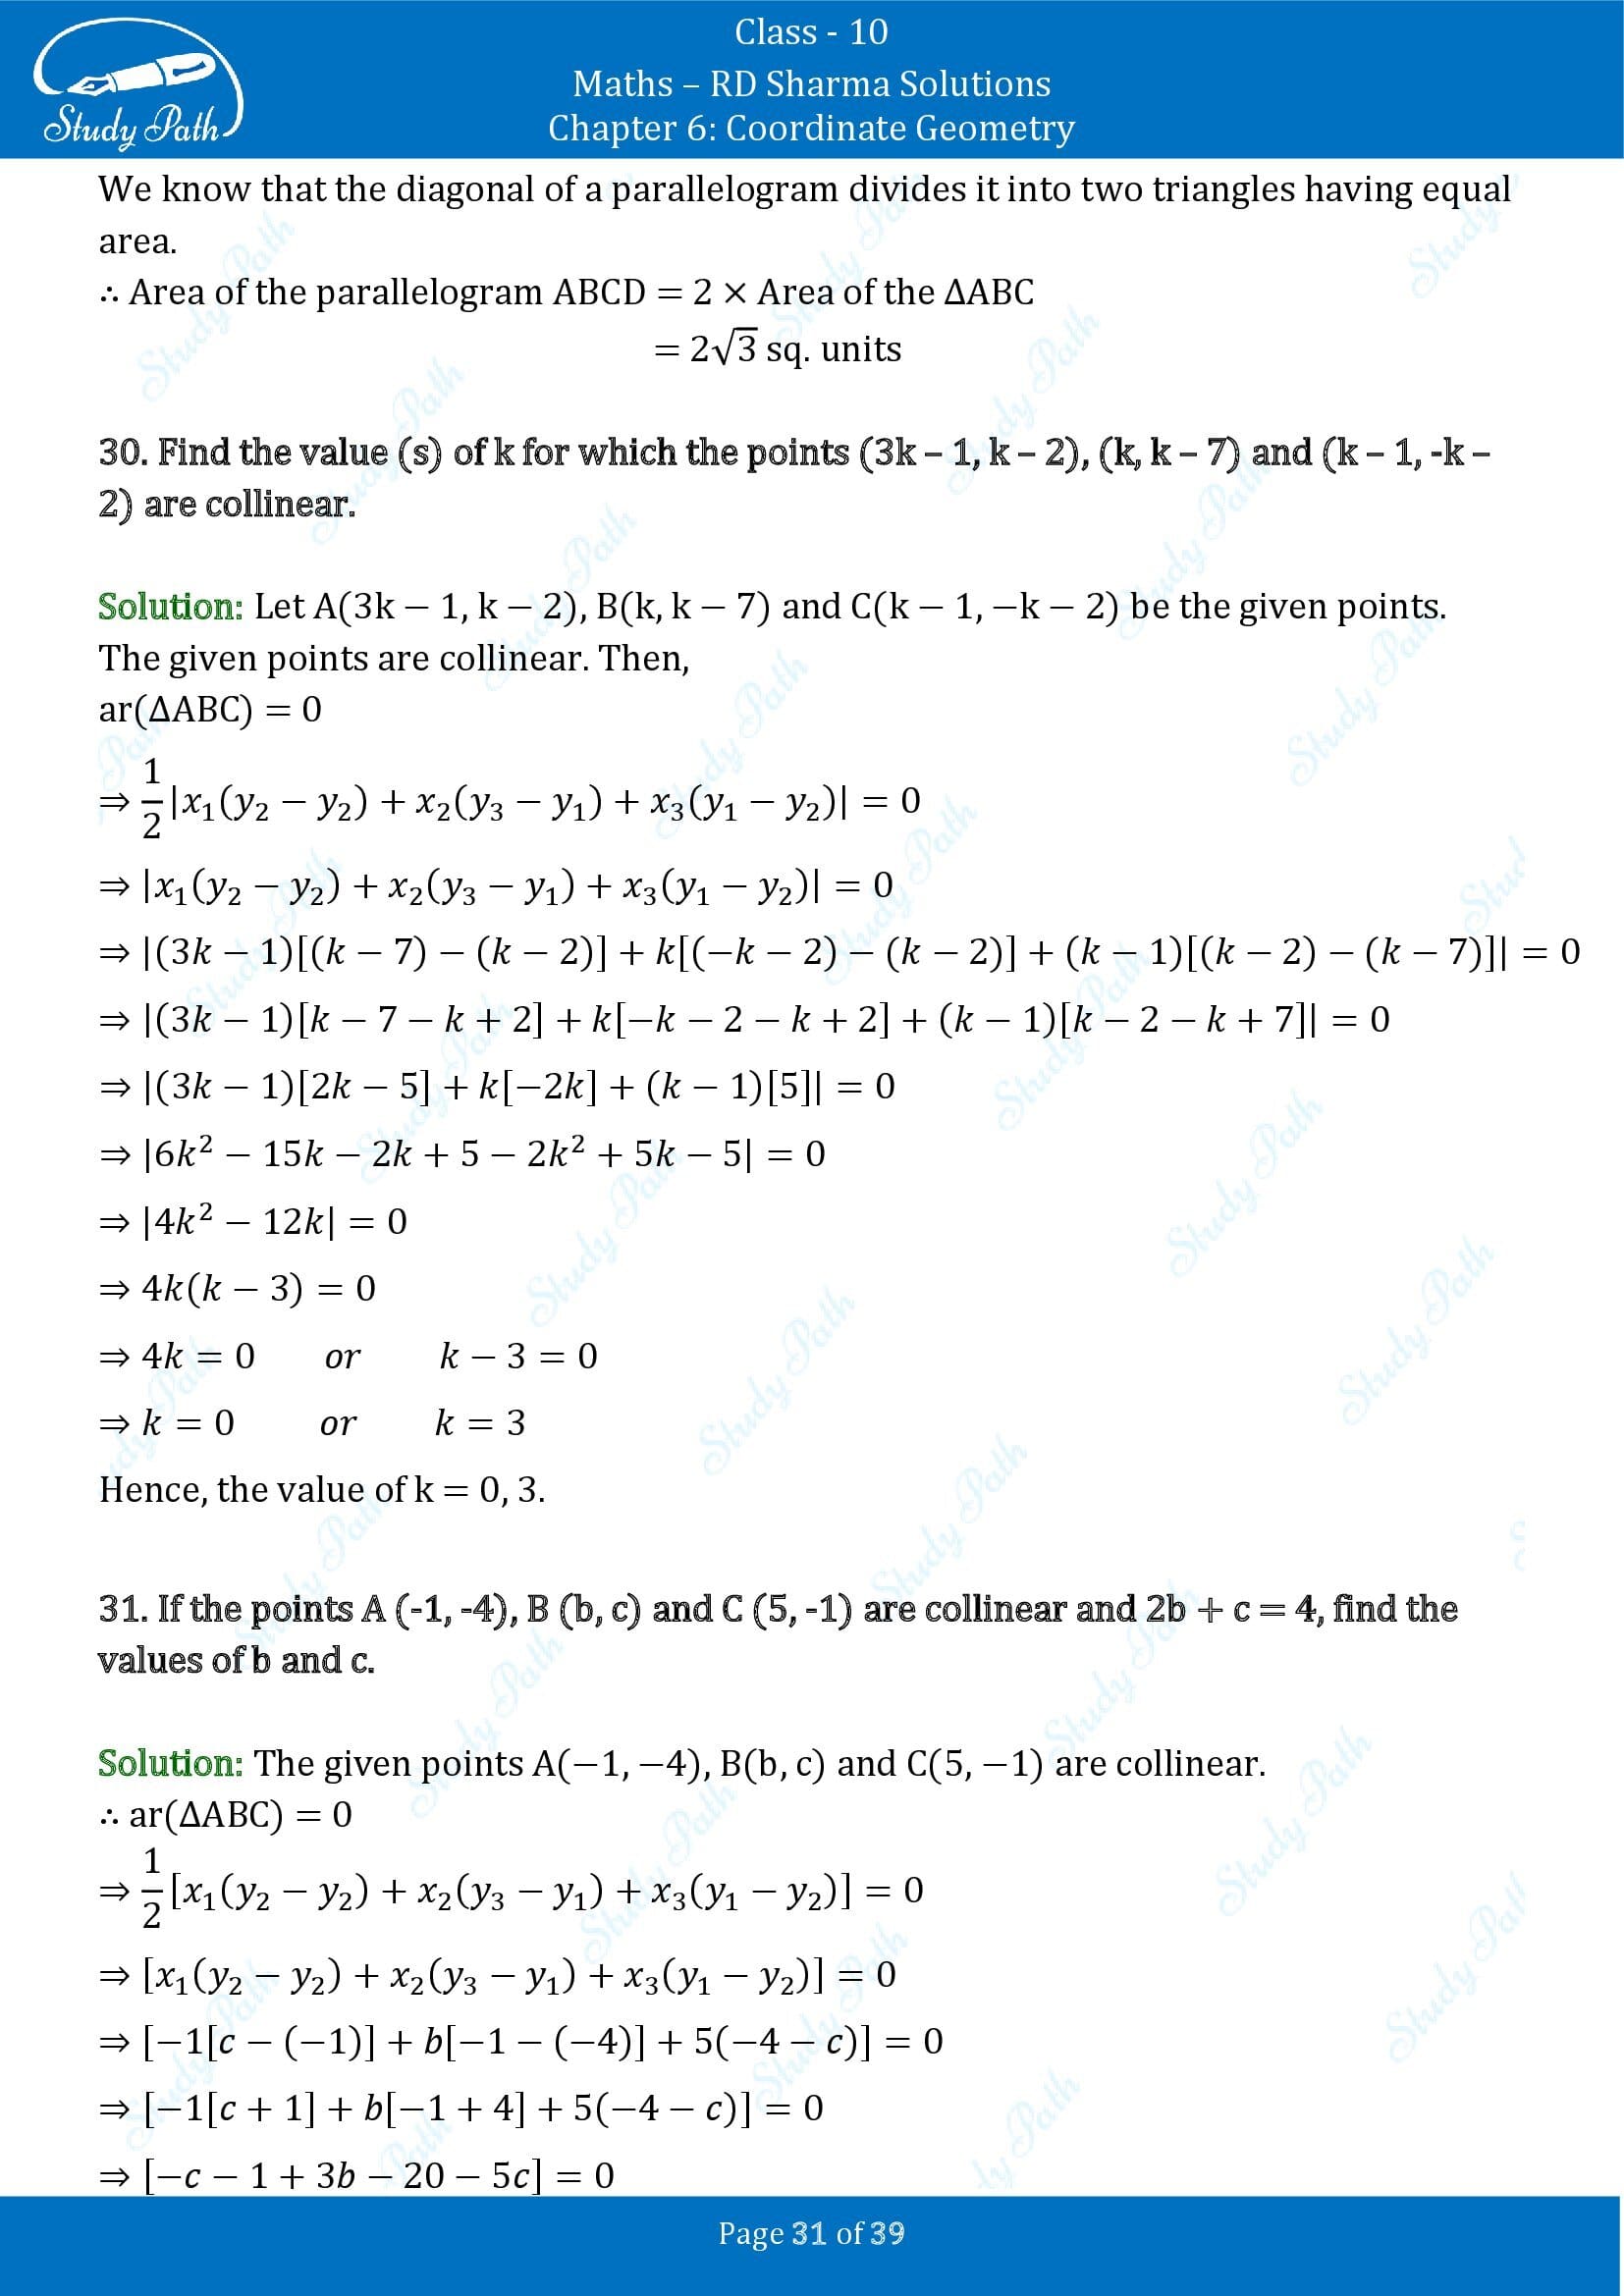 RD Sharma Solutions Class 10 Chapter 6 Coordinate Geometry Exercise 6.5 0031